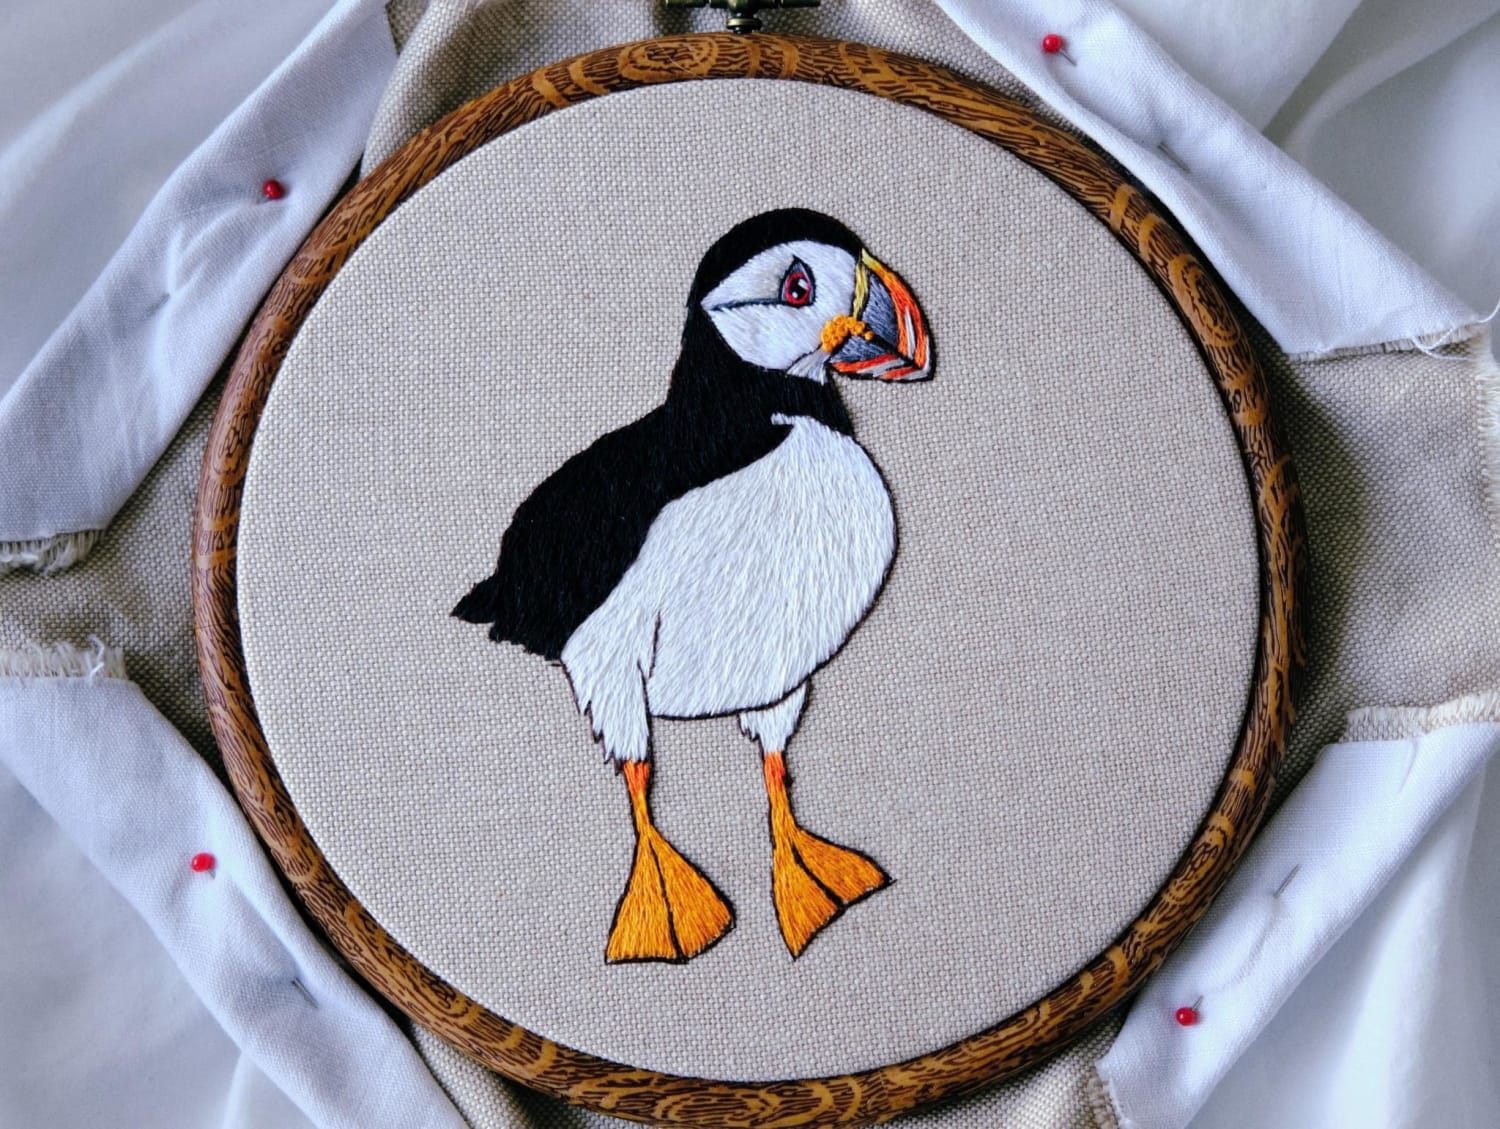 Not quite finished with this little puffin. There's still highlights/ shadows and final touches left to do! :))